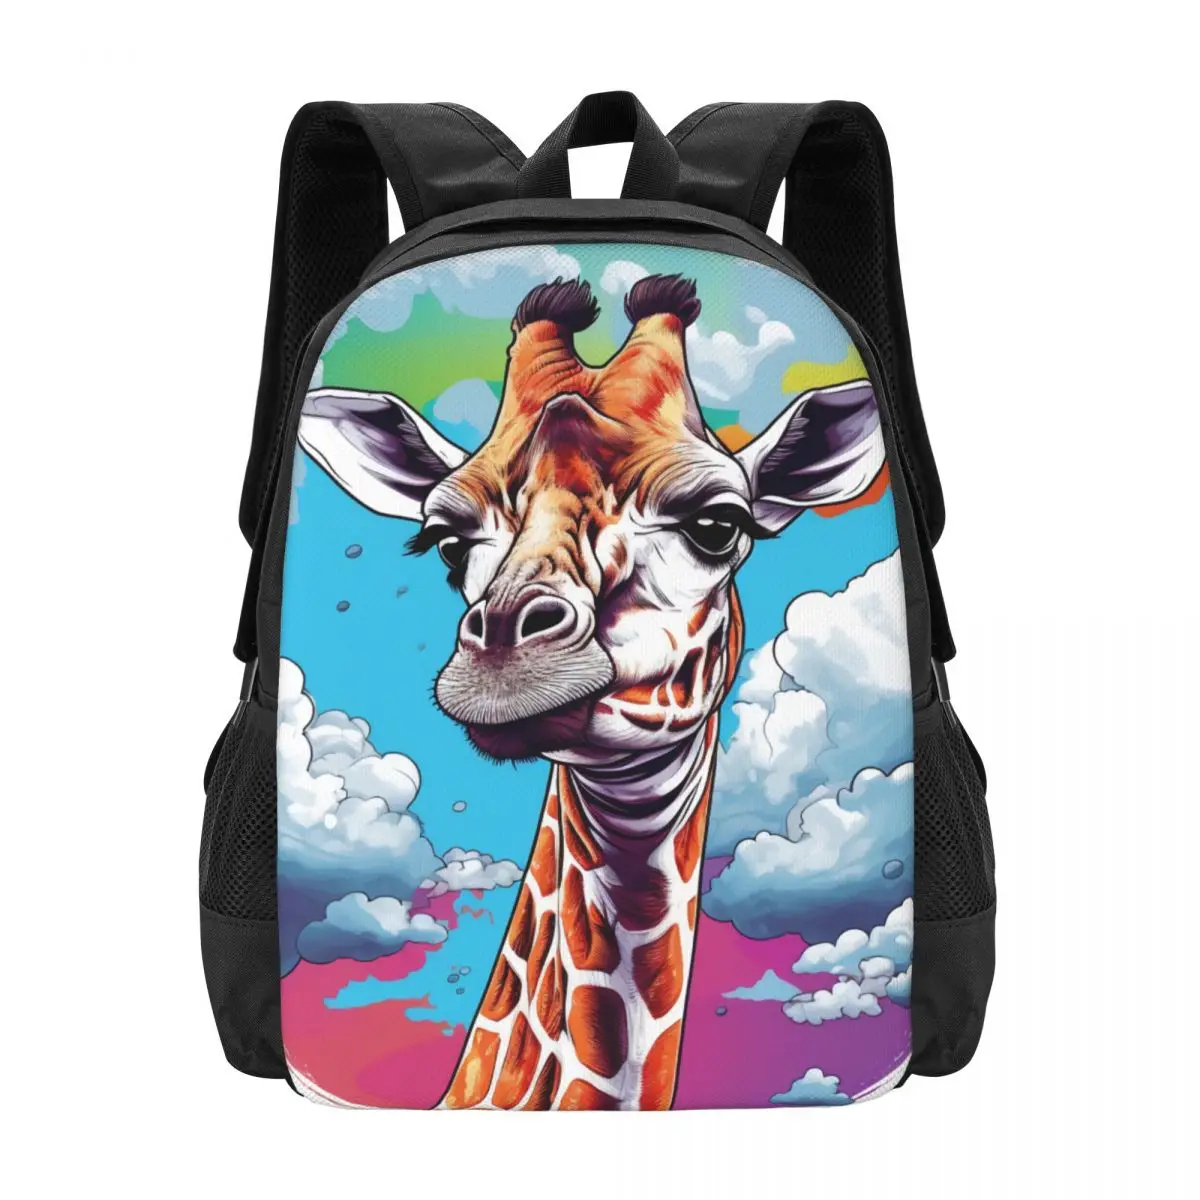 

Giraffe Backpack Boy Sky Vector Graphic Breathable Backpacks Polyester Casual School Bags Camping Design Rucksack